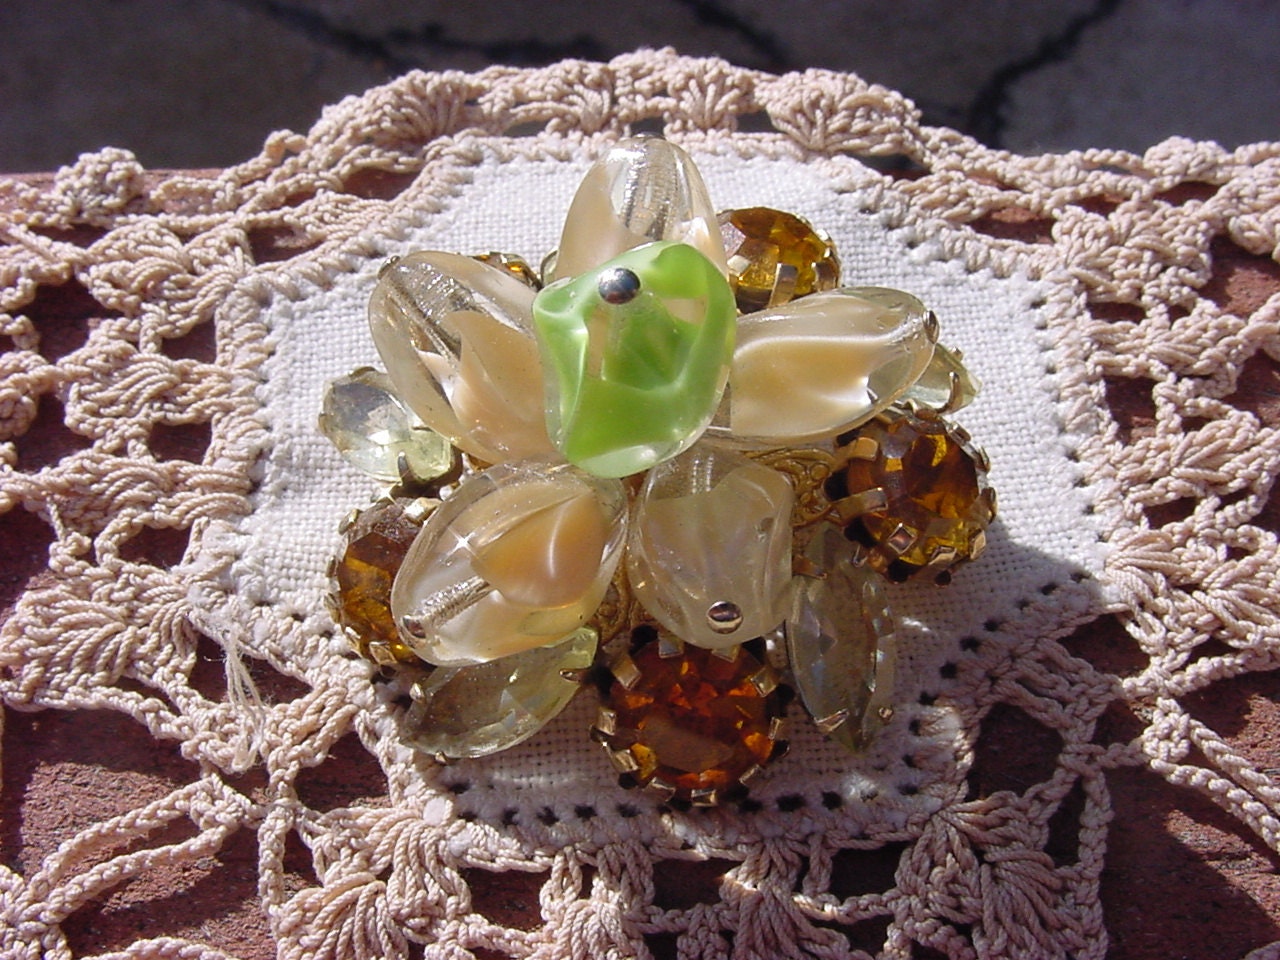 Most Uniquely Beautiful Givre and Rhinestone Vintage Glass Brooch